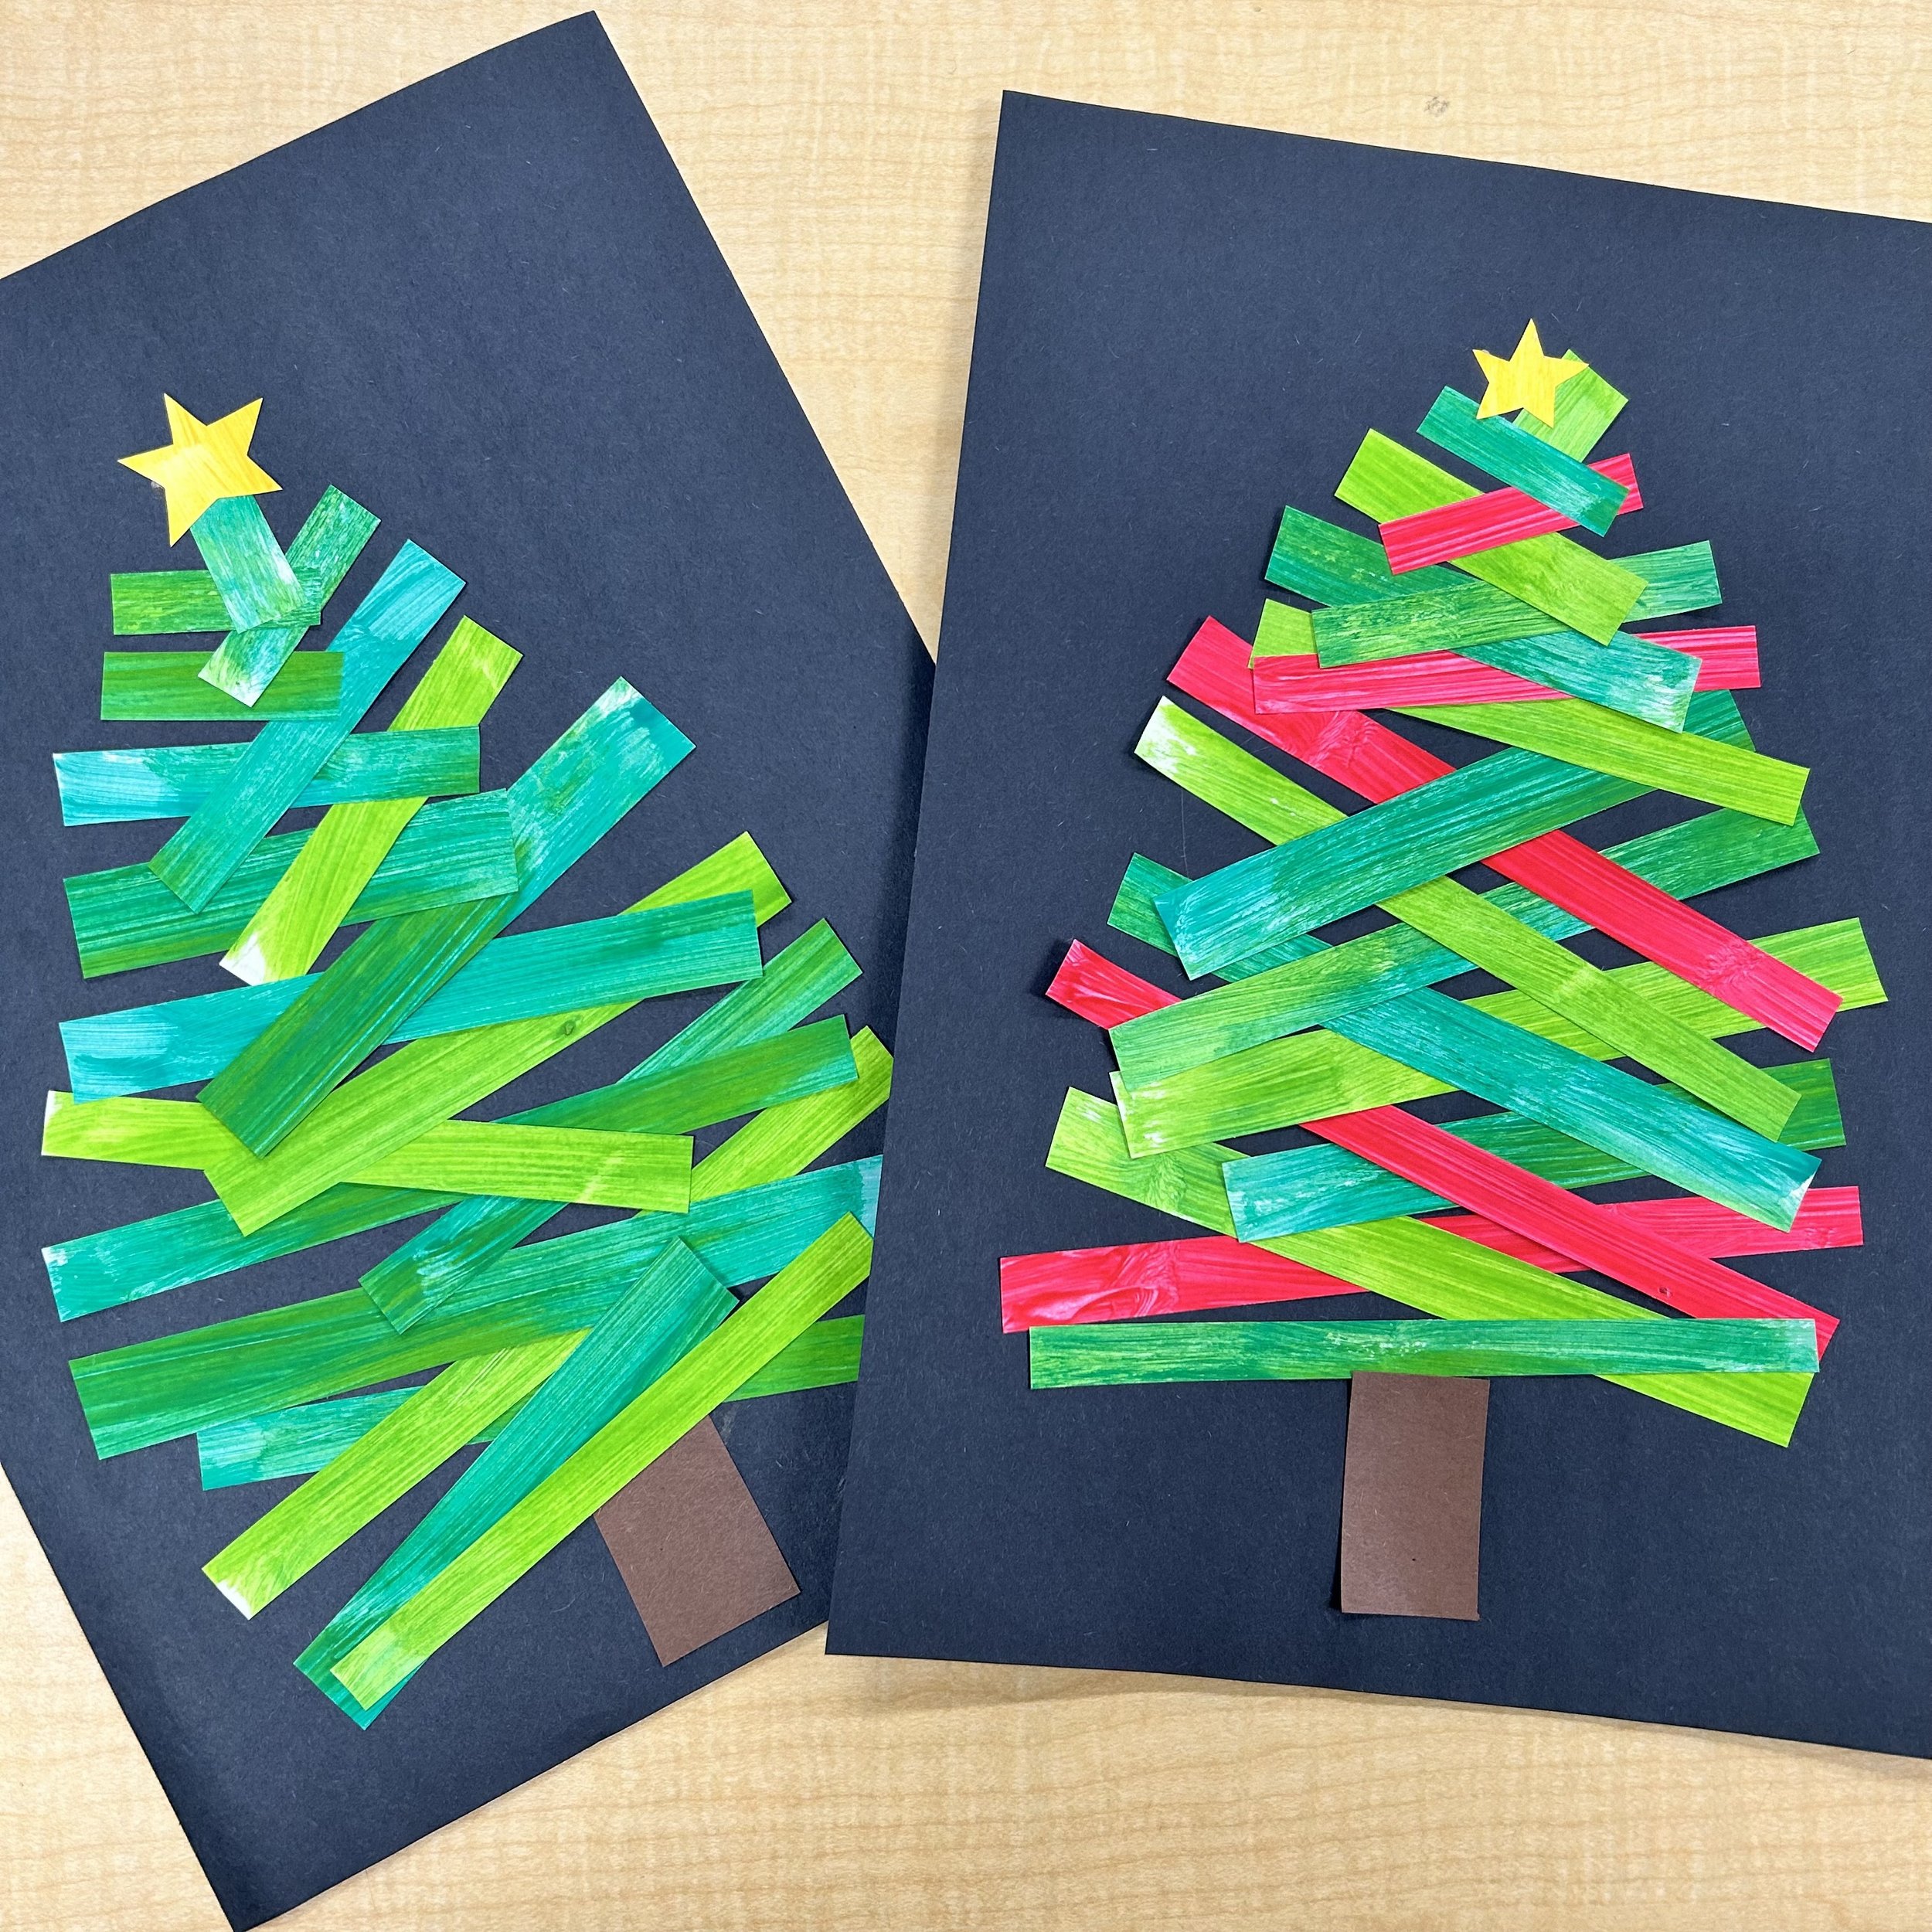 Construction Paper Christmas Tree Craft for Preschoolers